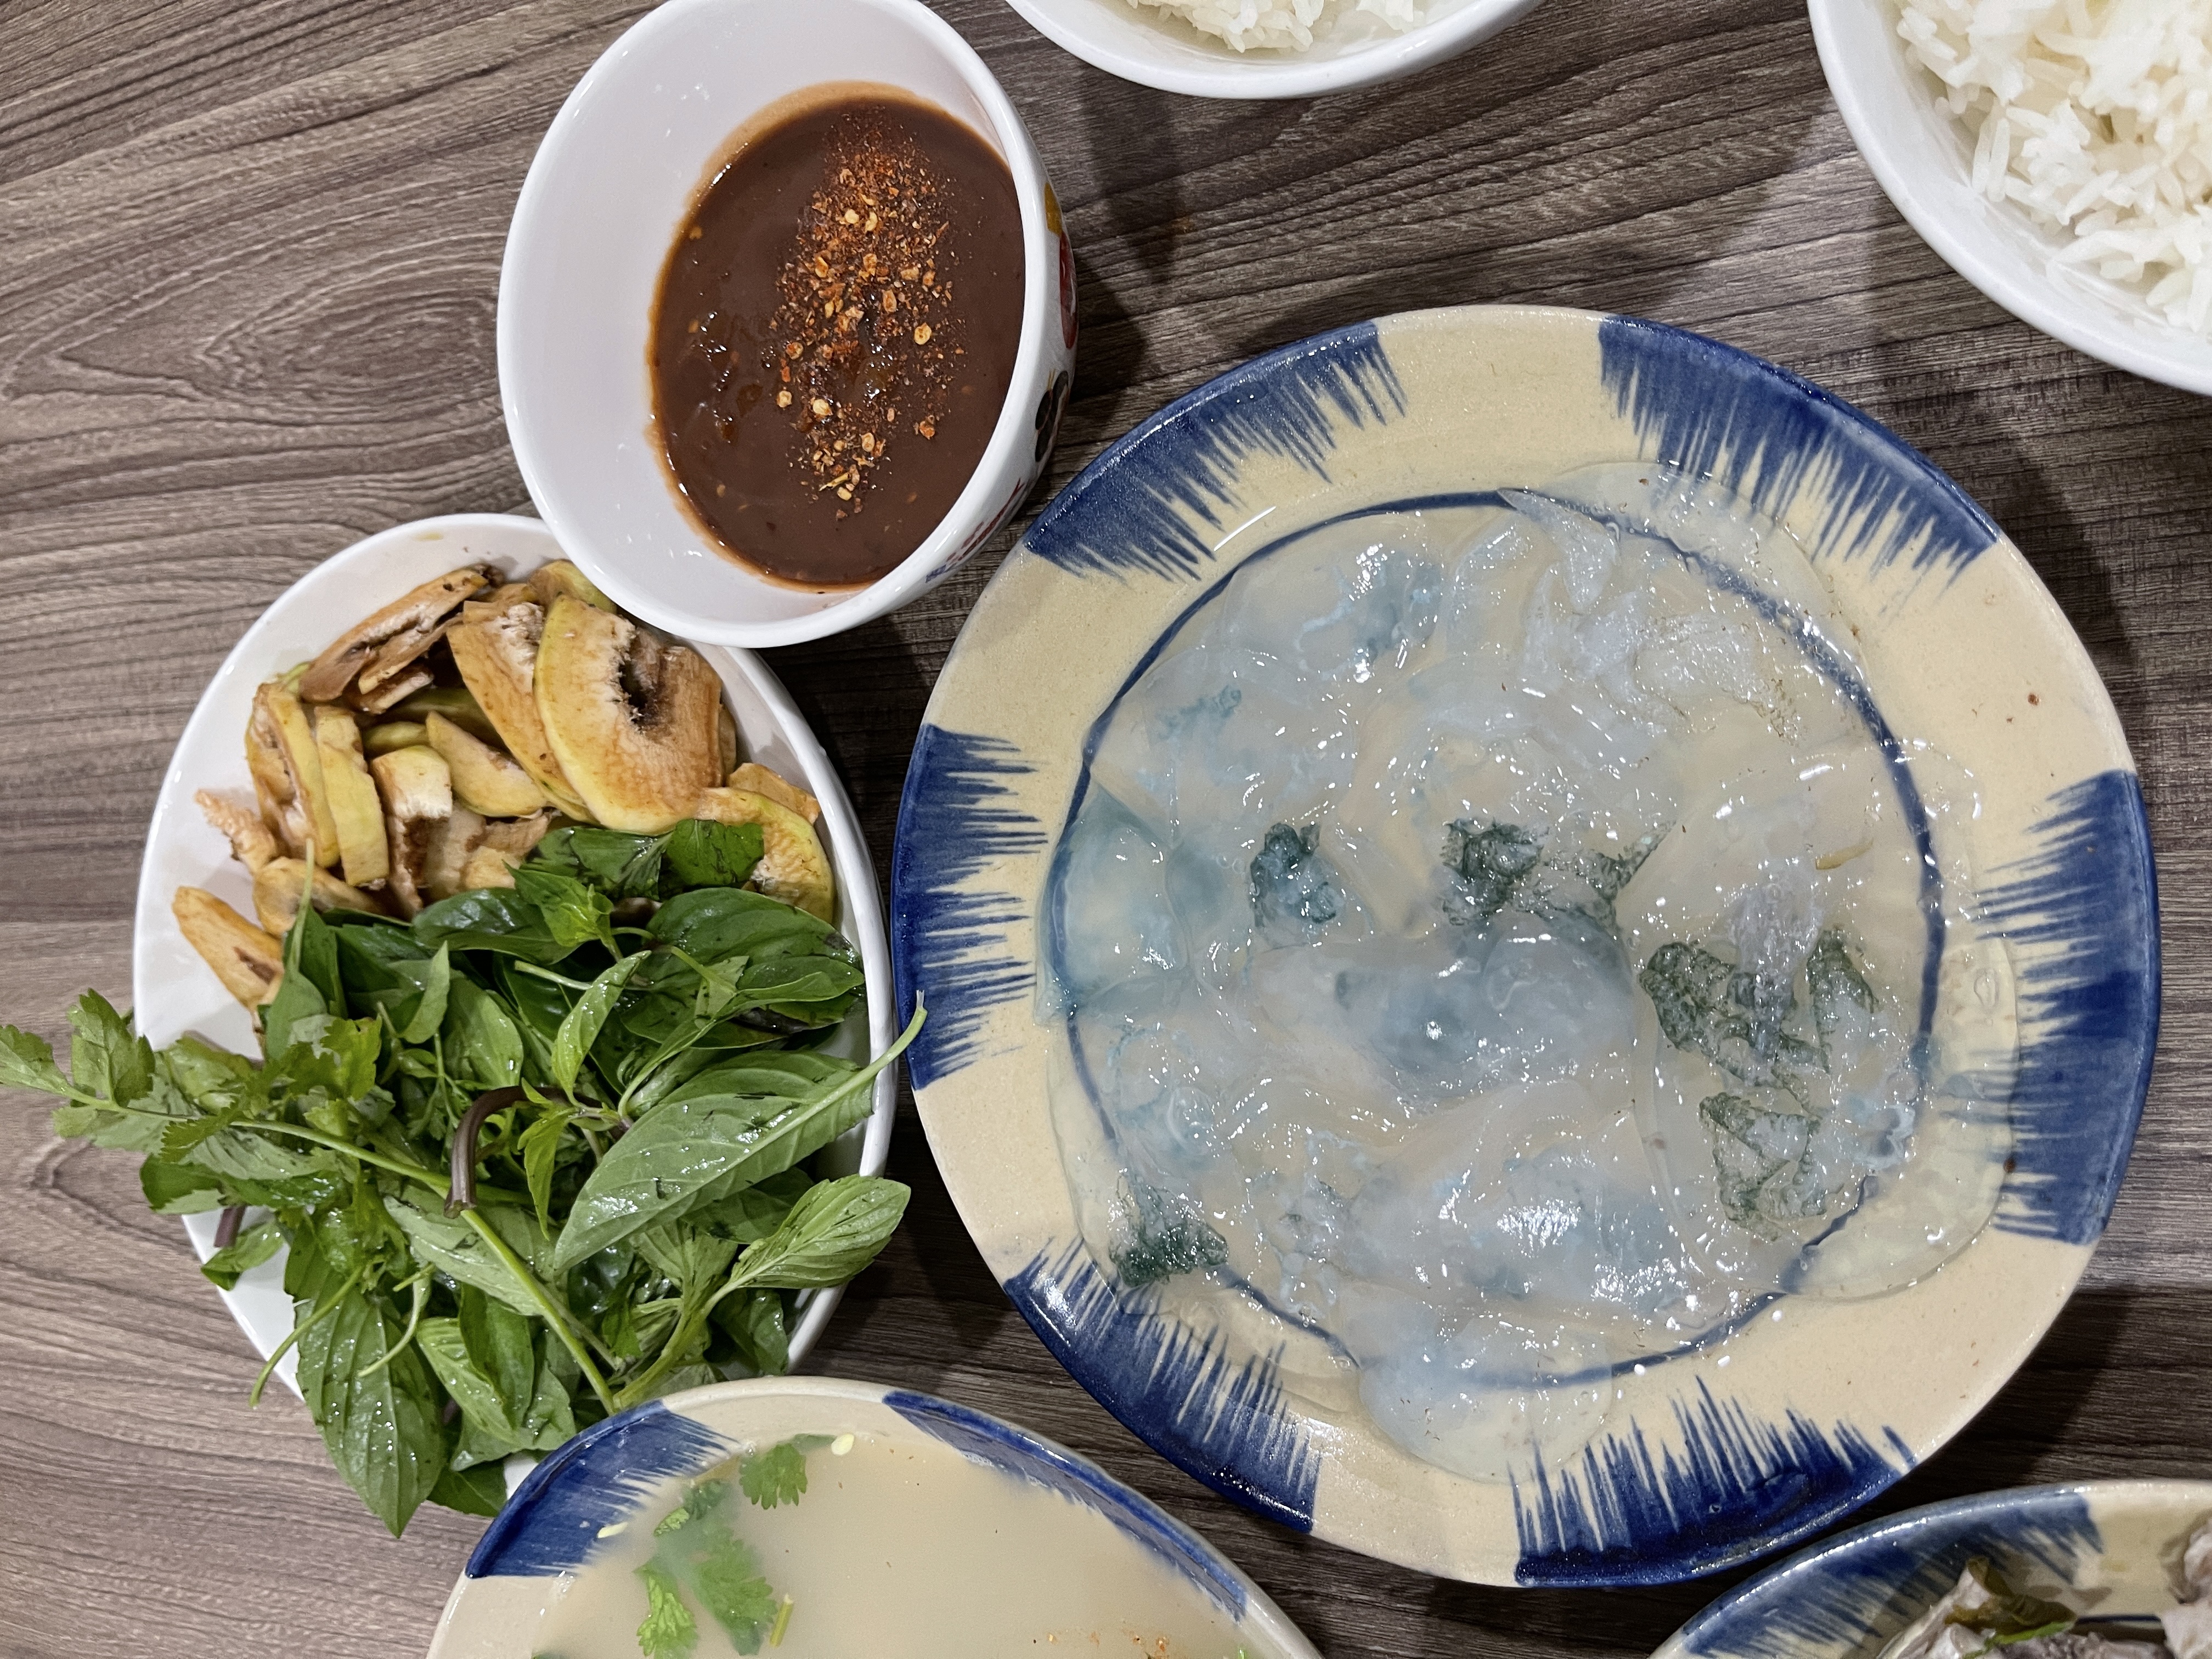 'Con nuốc' (Catostylus townsendi) is served with herbs and green roxburgh at a family meal in Ho Chi Minh City. Photo: Dong Nguyen / Tuoi Tre News